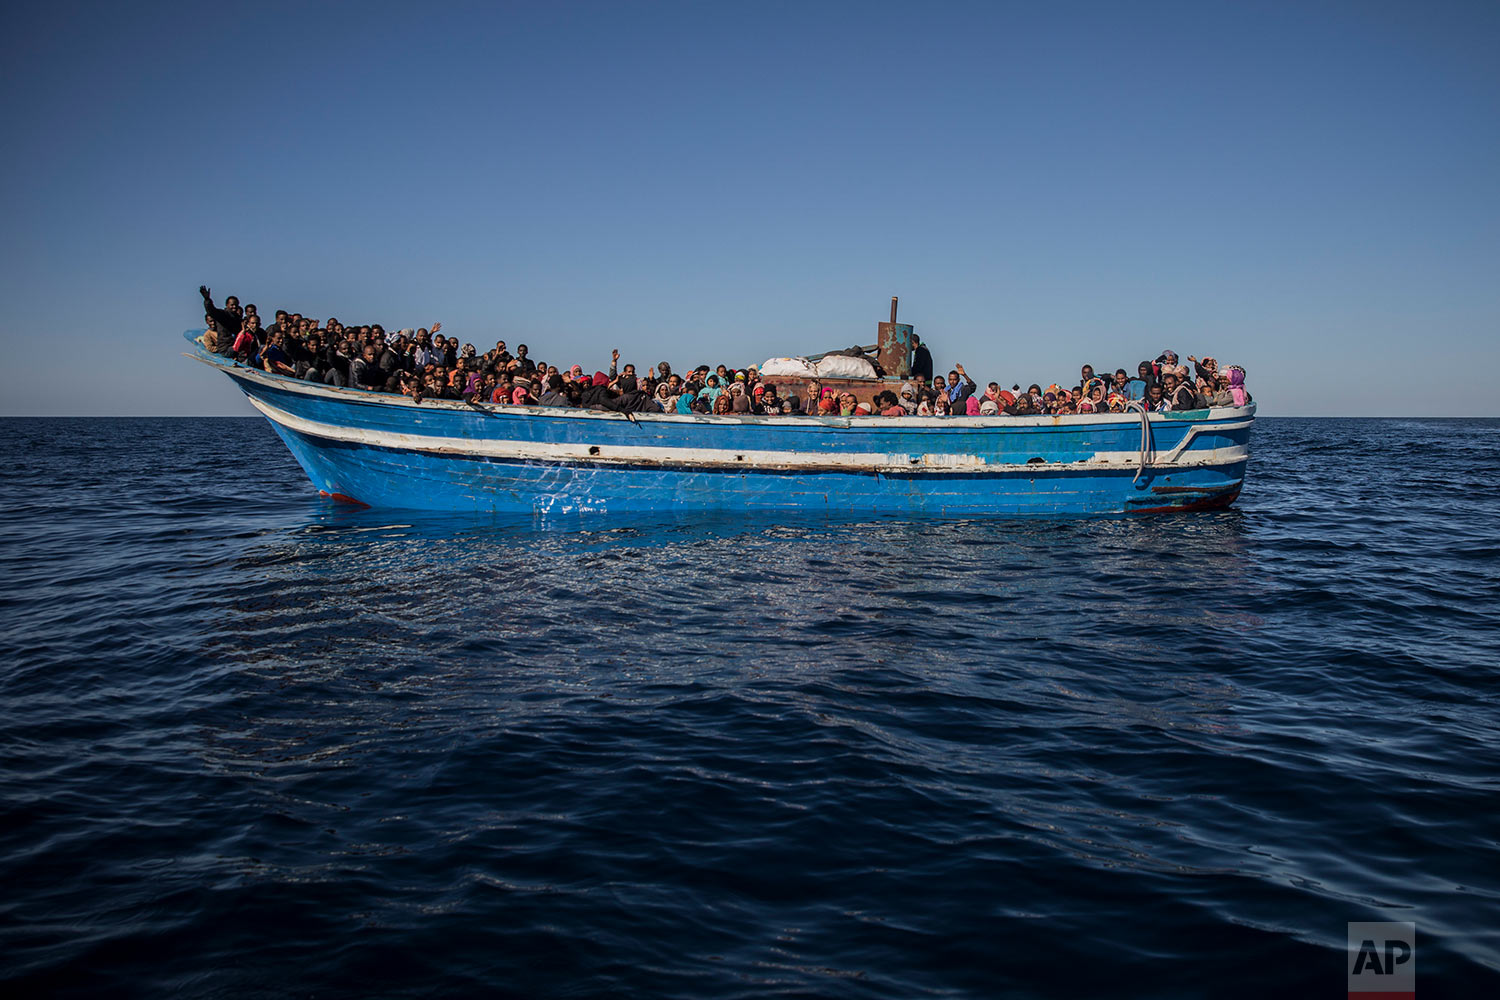  In this Tuesday, Jan. 16, 2018, photo, about 450 Sub-Saharan refugees and migrants, mostly from Eritrea, wait to be rescued by aid workers of Spanish NGO Proactiva Open Arms, as they were trying to leave the Libyan coast and reach European soil aboard an overcrowded wooden boat, 34 miles north of Kasr-El-Karabulli, Libya. (AP Photo/Santi Palacios)&nbsp; |&nbsp; See these photos on AP Images  